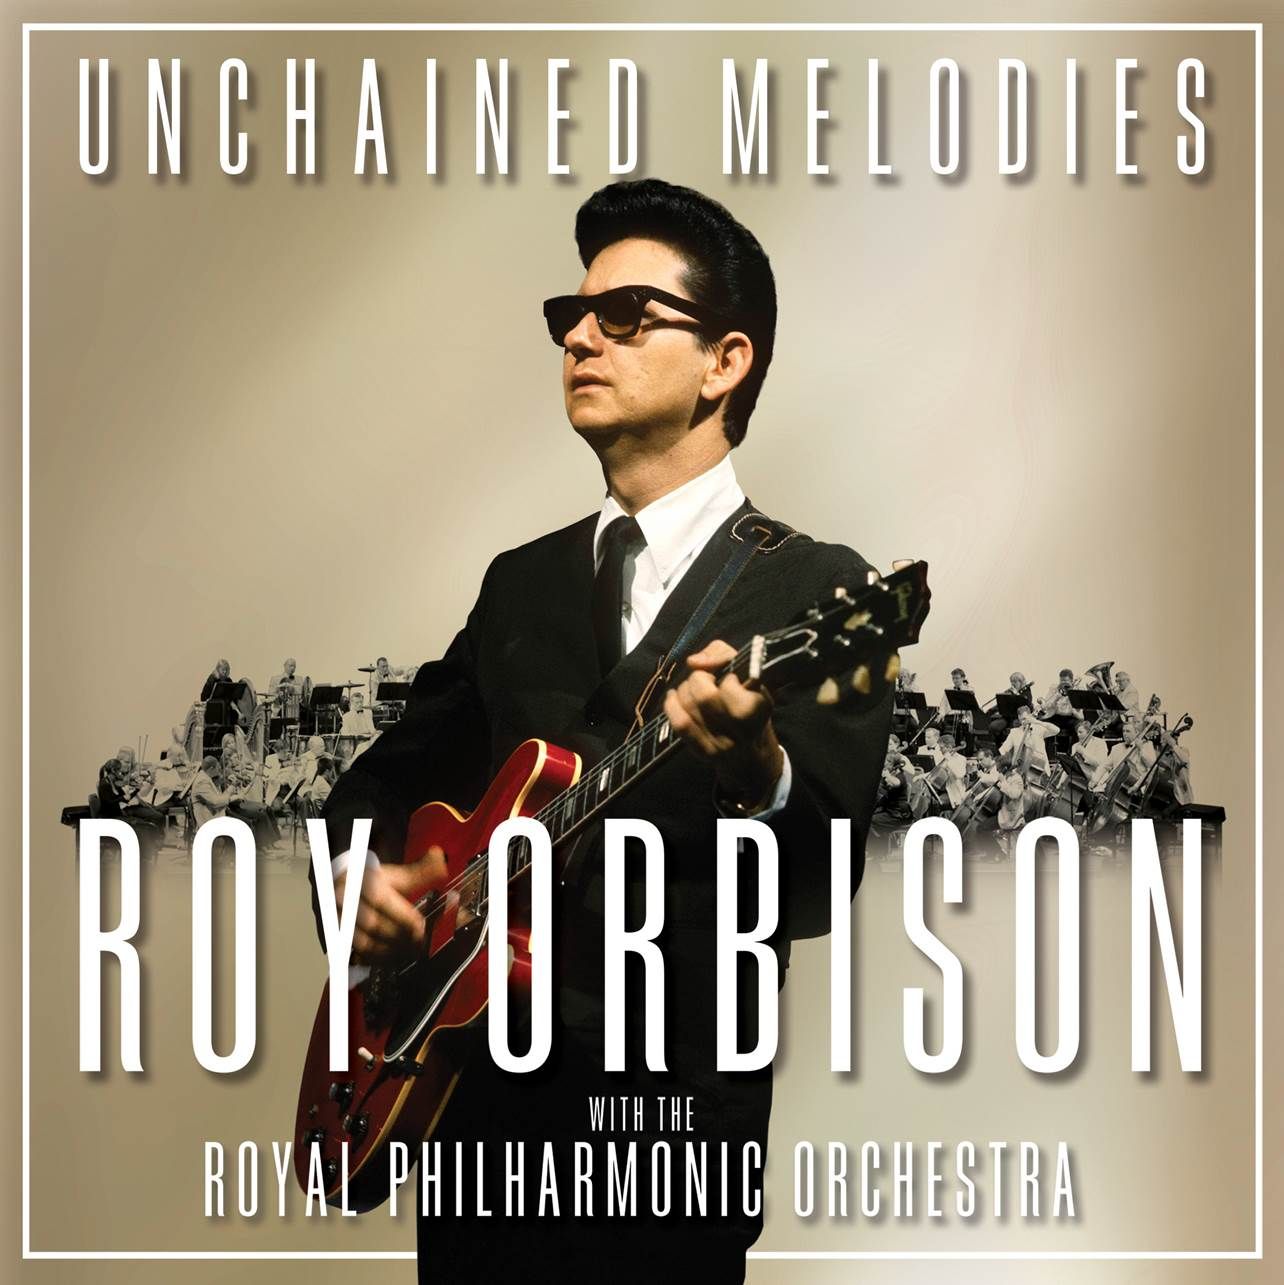 ROY ORBISON / ロイ・オービソン / UNCHAINED MELODIES ROY ORBISON  WITH THE ROYAL PHILHARMONIC ORCHESTRA / アンチェインド・メロディーズ